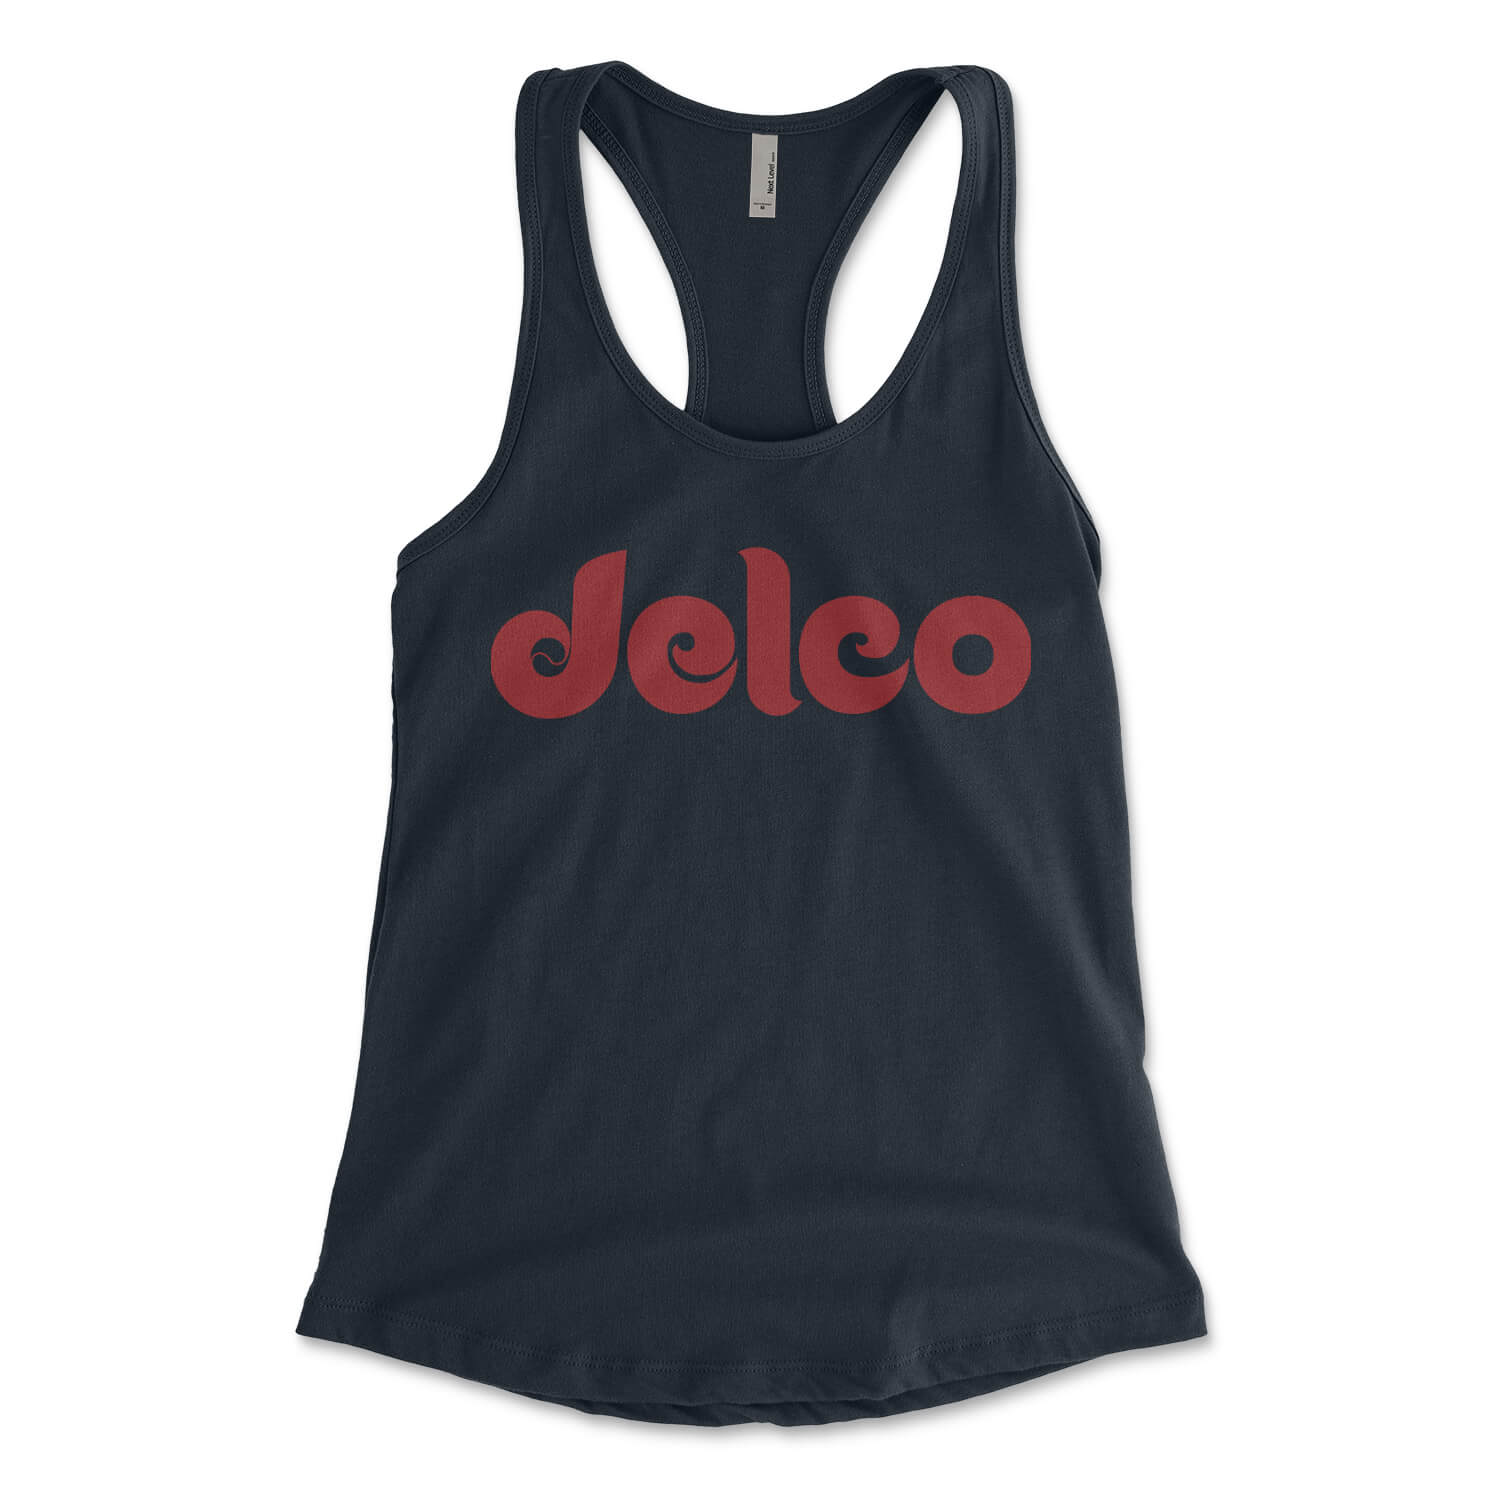 Delco midnight navy blue womens racerback tank top from Phillygoat